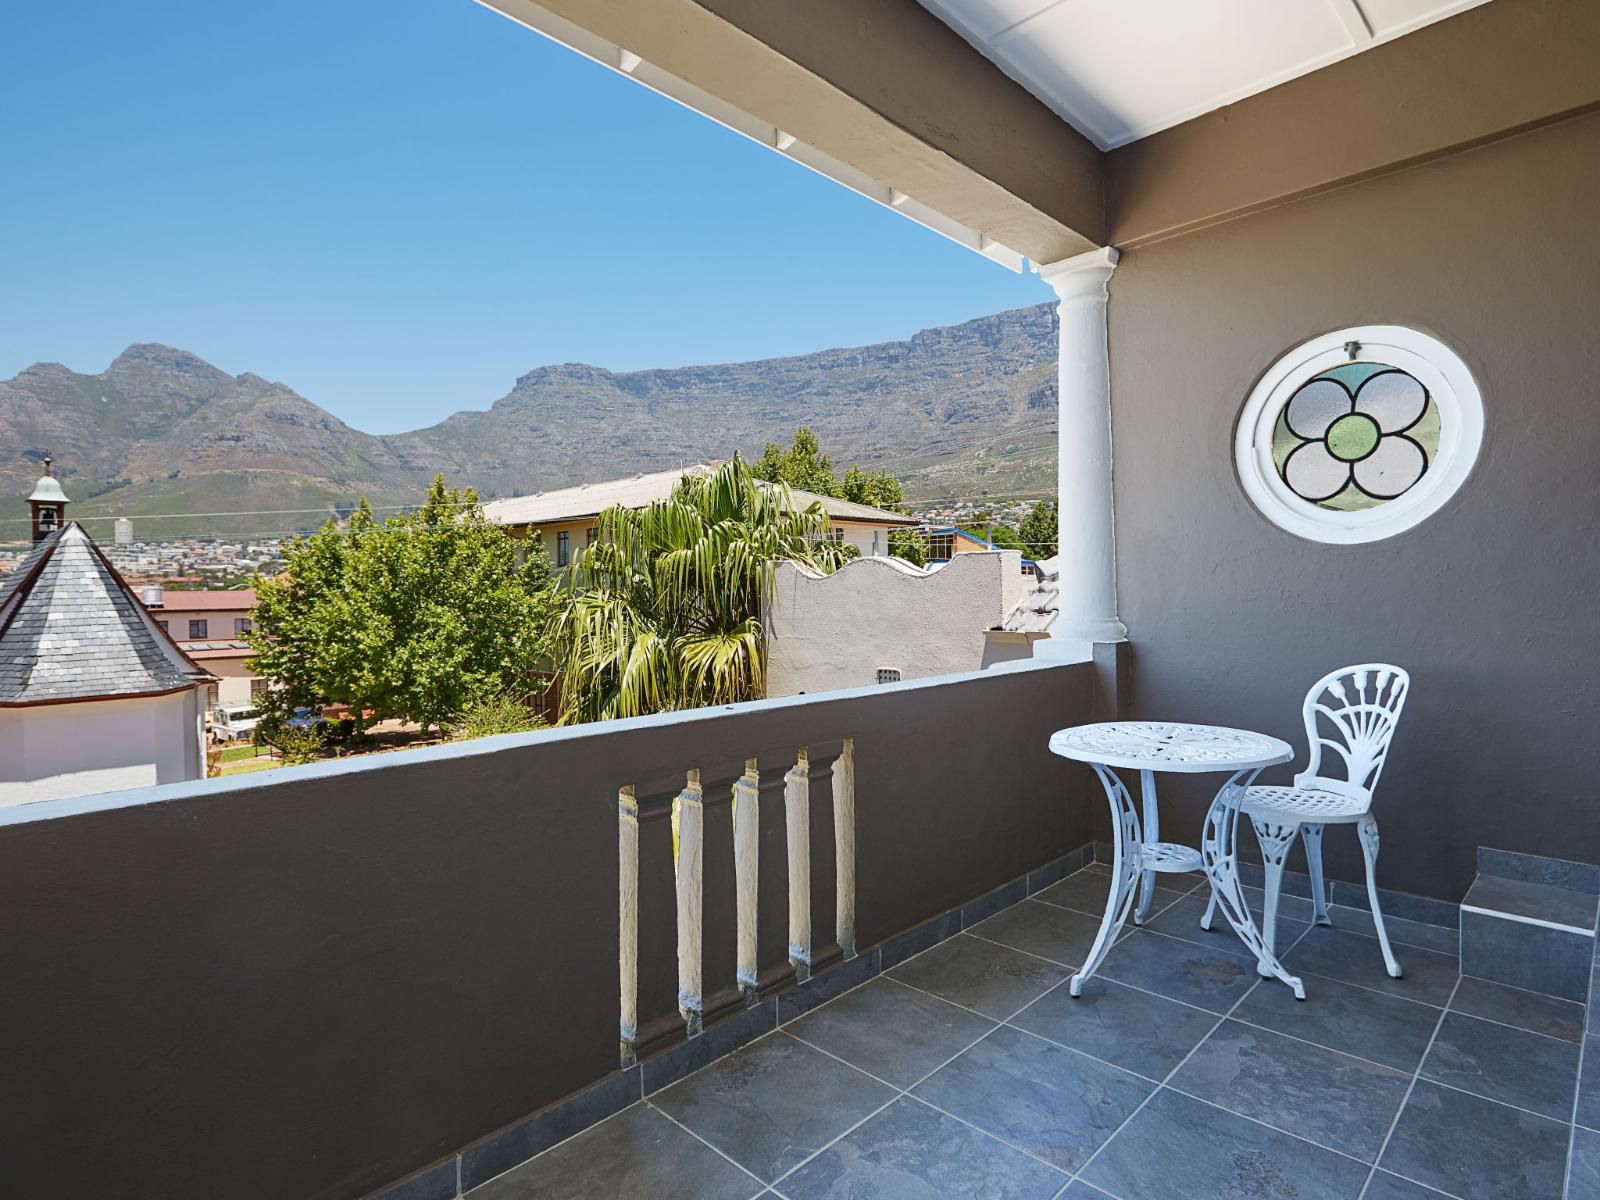 Cloud 9 Boutique Hotel And Spa Tamboerskloof Cape Town Western Cape South Africa Balcony, Architecture, House, Building